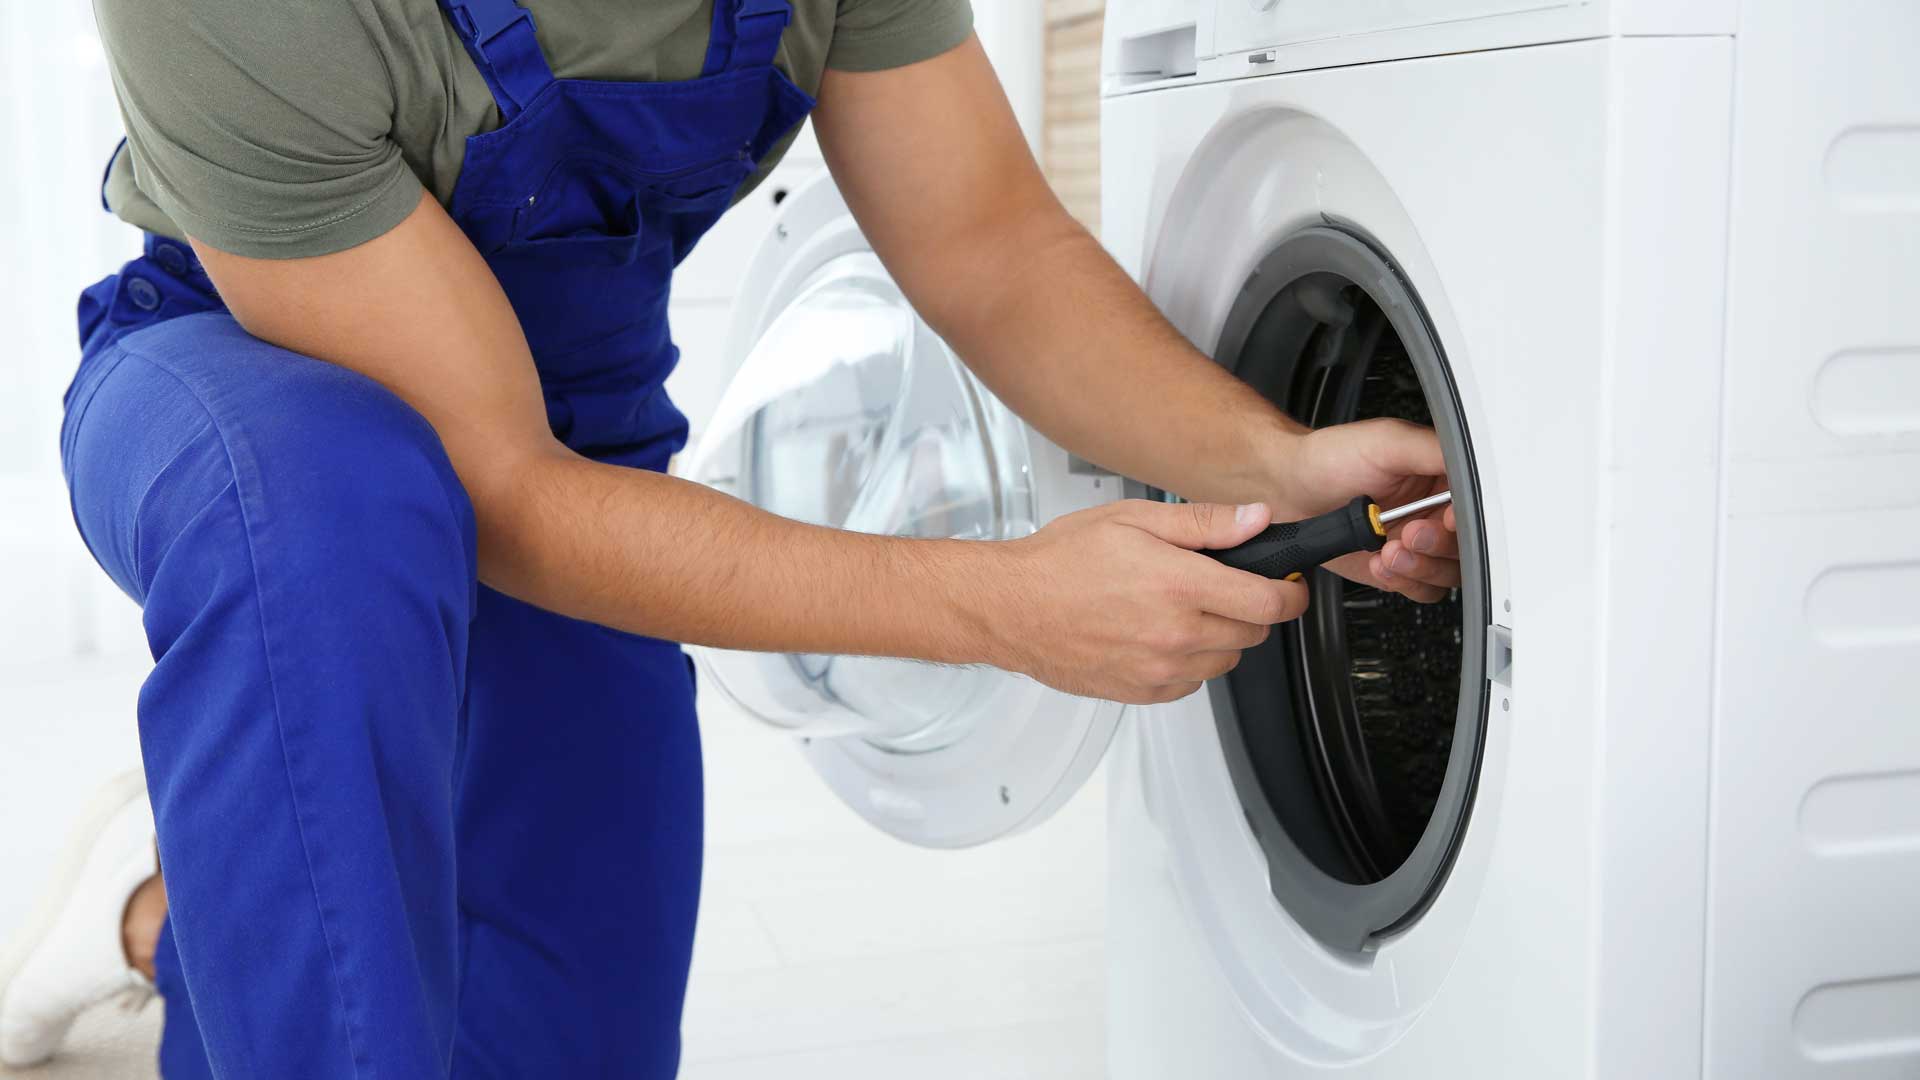 A repair man in blue overalls fixing a washer/dryer